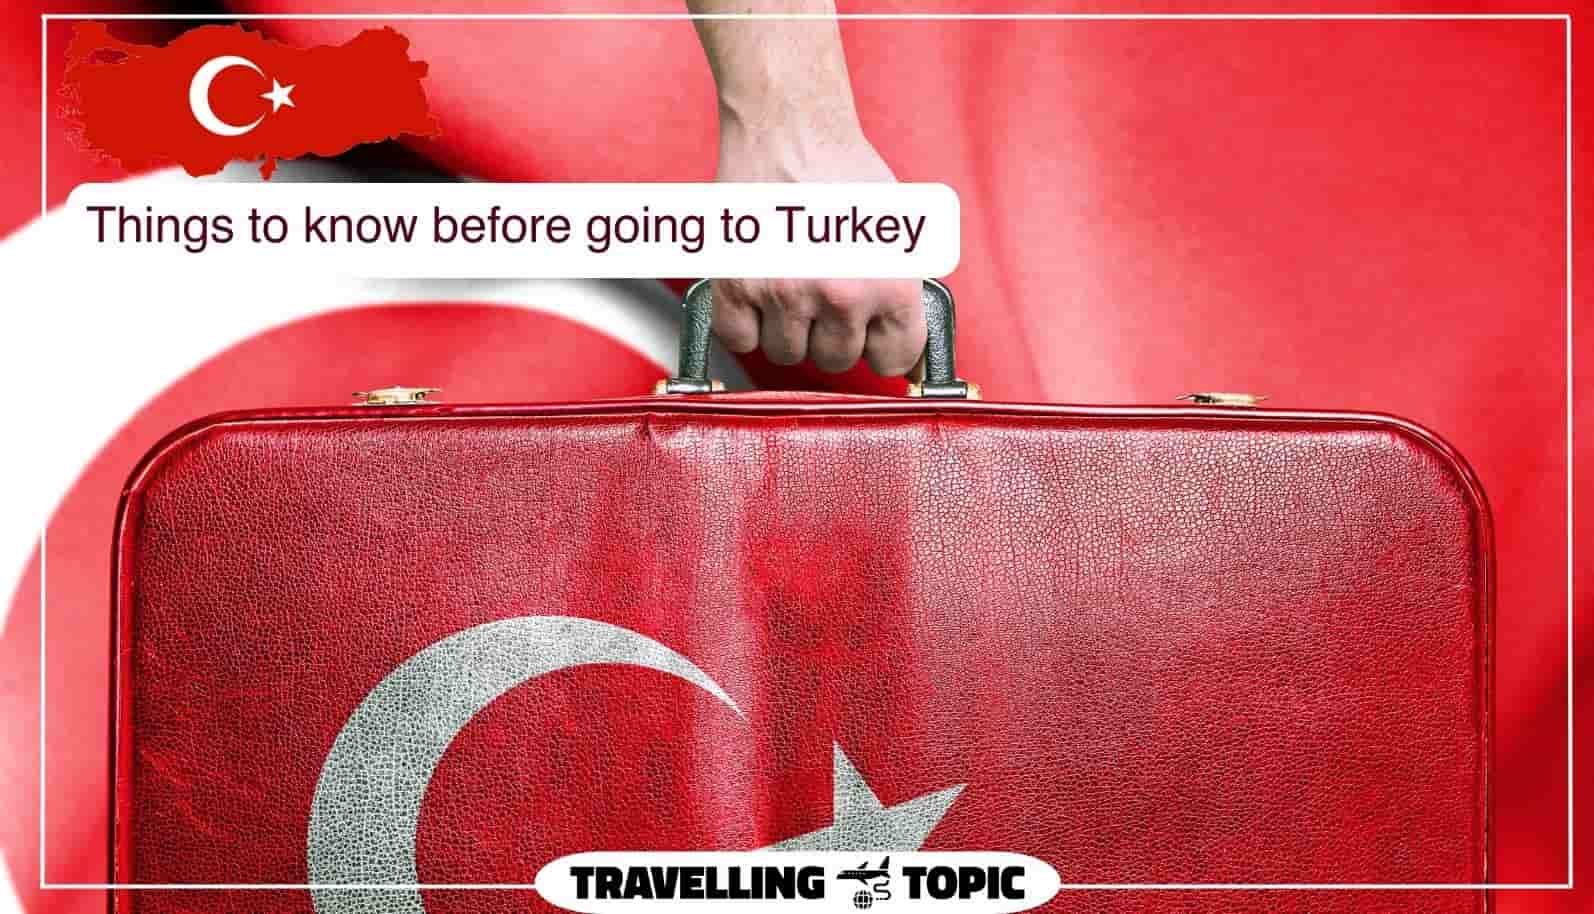 Things to know before going to Turkey